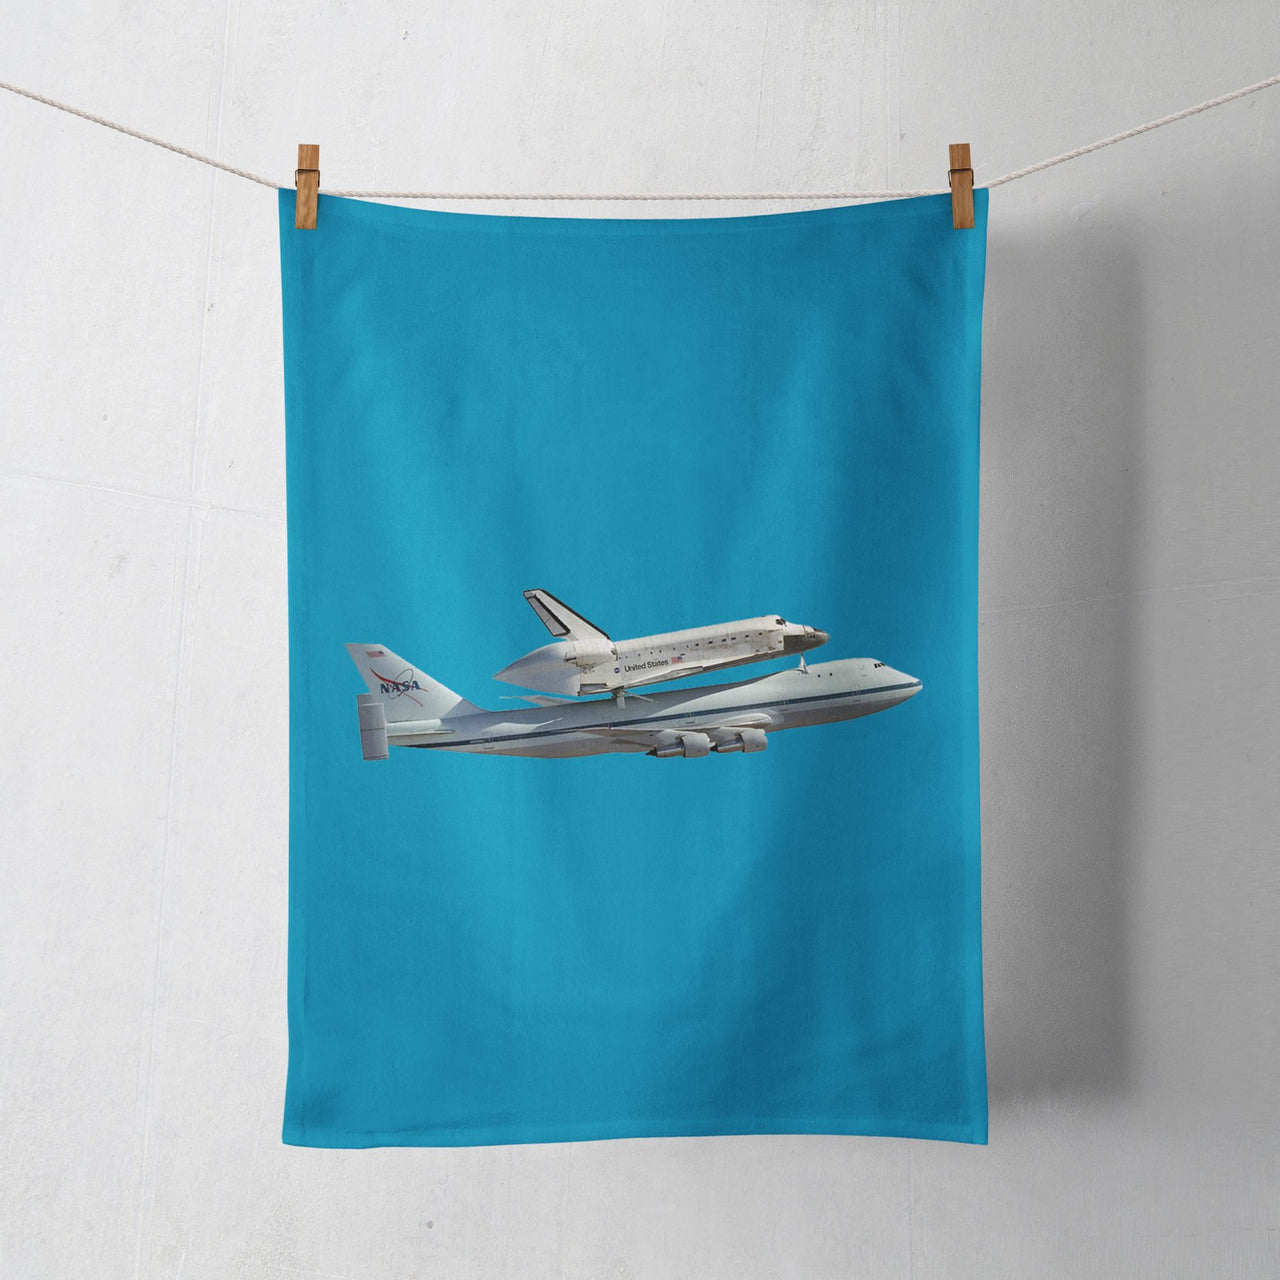 Space shuttle on 747 Designed Towels